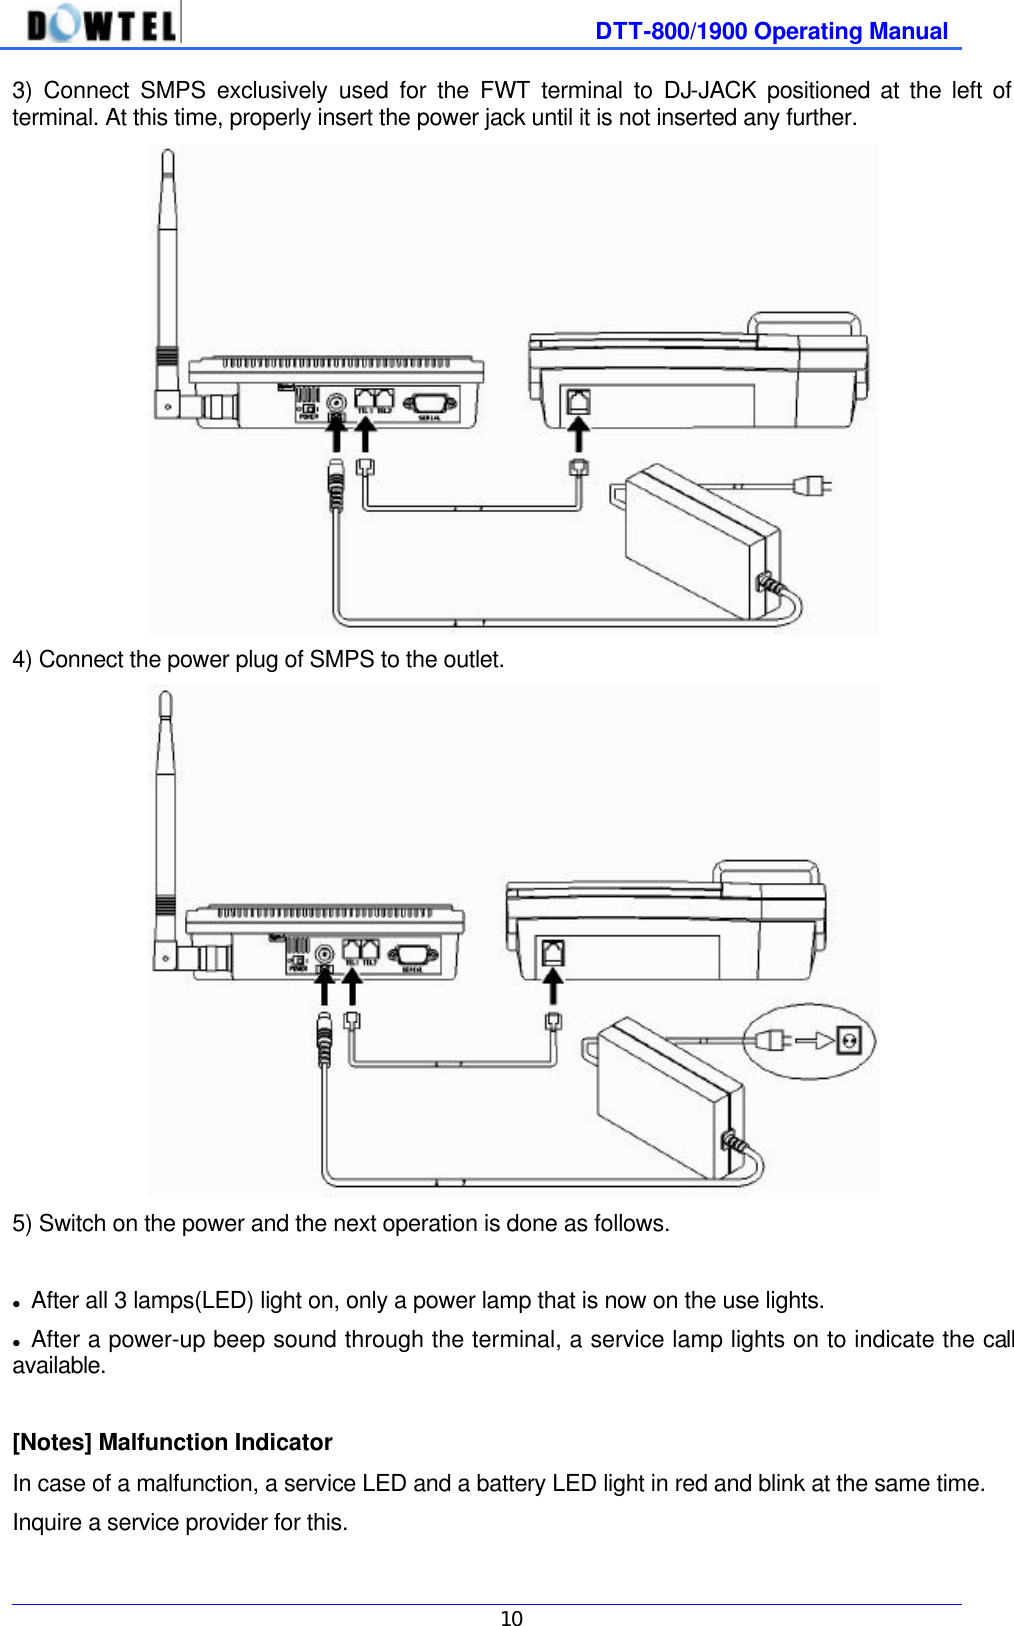              DTT-800/1900 Operating Manual   10 3)  Connect SMPS exclusively used for the FWT terminal to DJ-JACK  positioned at the left of terminal. At this time, properly insert the power jack until it is not inserted any further.  4) Connect the power plug of SMPS to the outlet.    5) Switch on the power and the next operation is done as follows.  l After all 3 lamps(LED) light on, only a power lamp that is now on the use lights. l After a power-up beep sound through the terminal, a service lamp lights on to indicate the call available.  [Notes] Malfunction Indicator In case of a malfunction, a service LED and a battery LED light in red and blink at the same time. Inquire a service provider for this. 